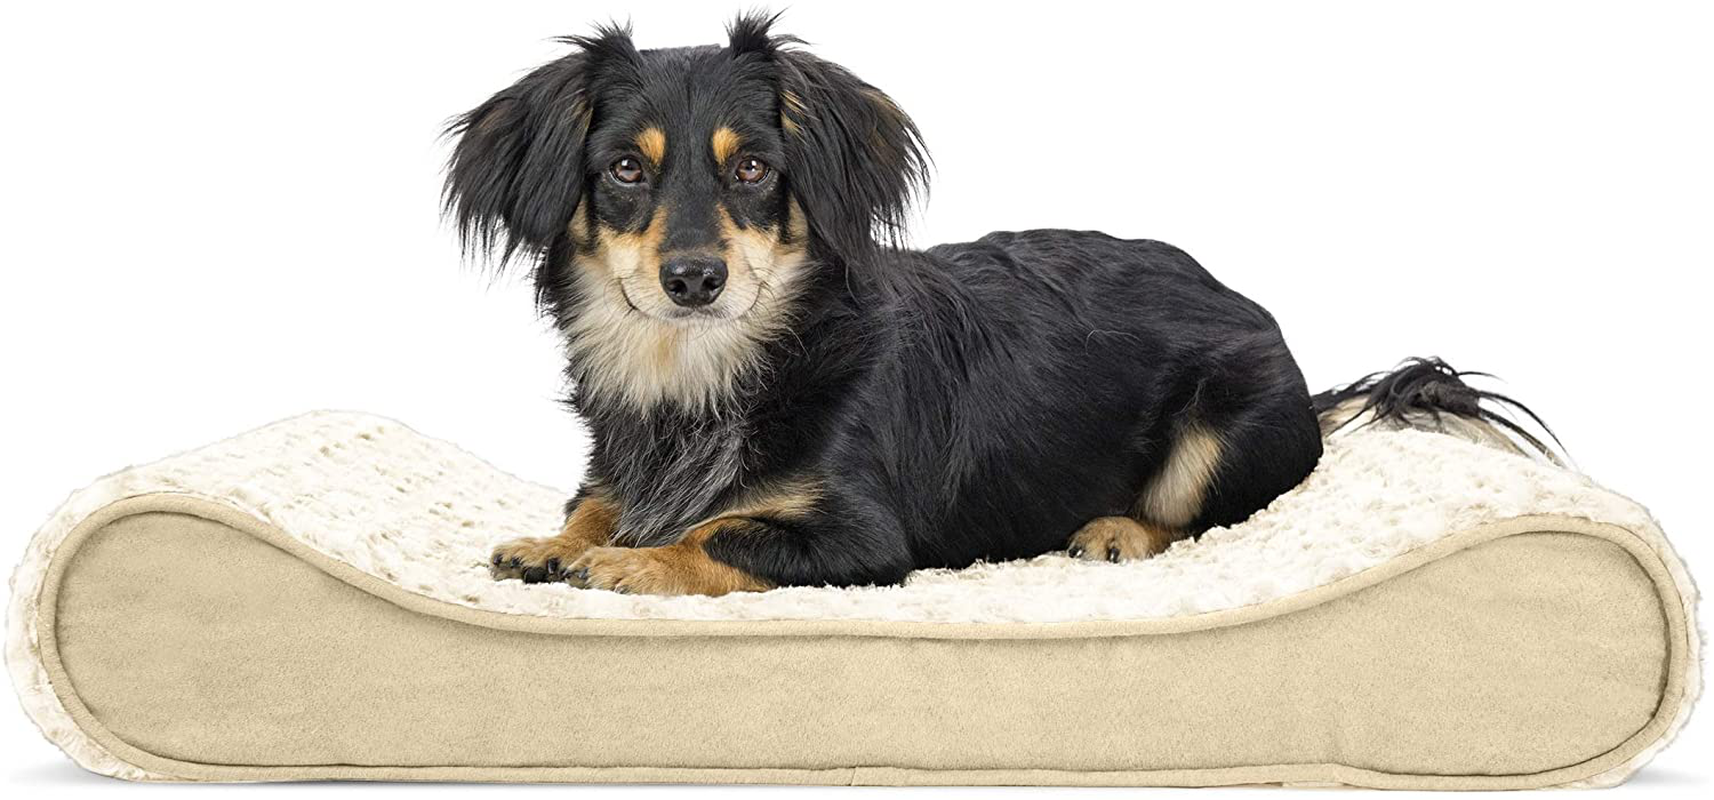 Furhaven Orthopedic, Cooling Gel, and Memory Foam Pet Beds for Small, Medium, and Large Dogs - Ergonomic Contour Luxe Lounger Dog Bed Mattress and More Animals & Pet Supplies > Pet Supplies > Dog Supplies > Dog Beds Furhaven Ultra Plush Cream Orthopedic Foam Medium